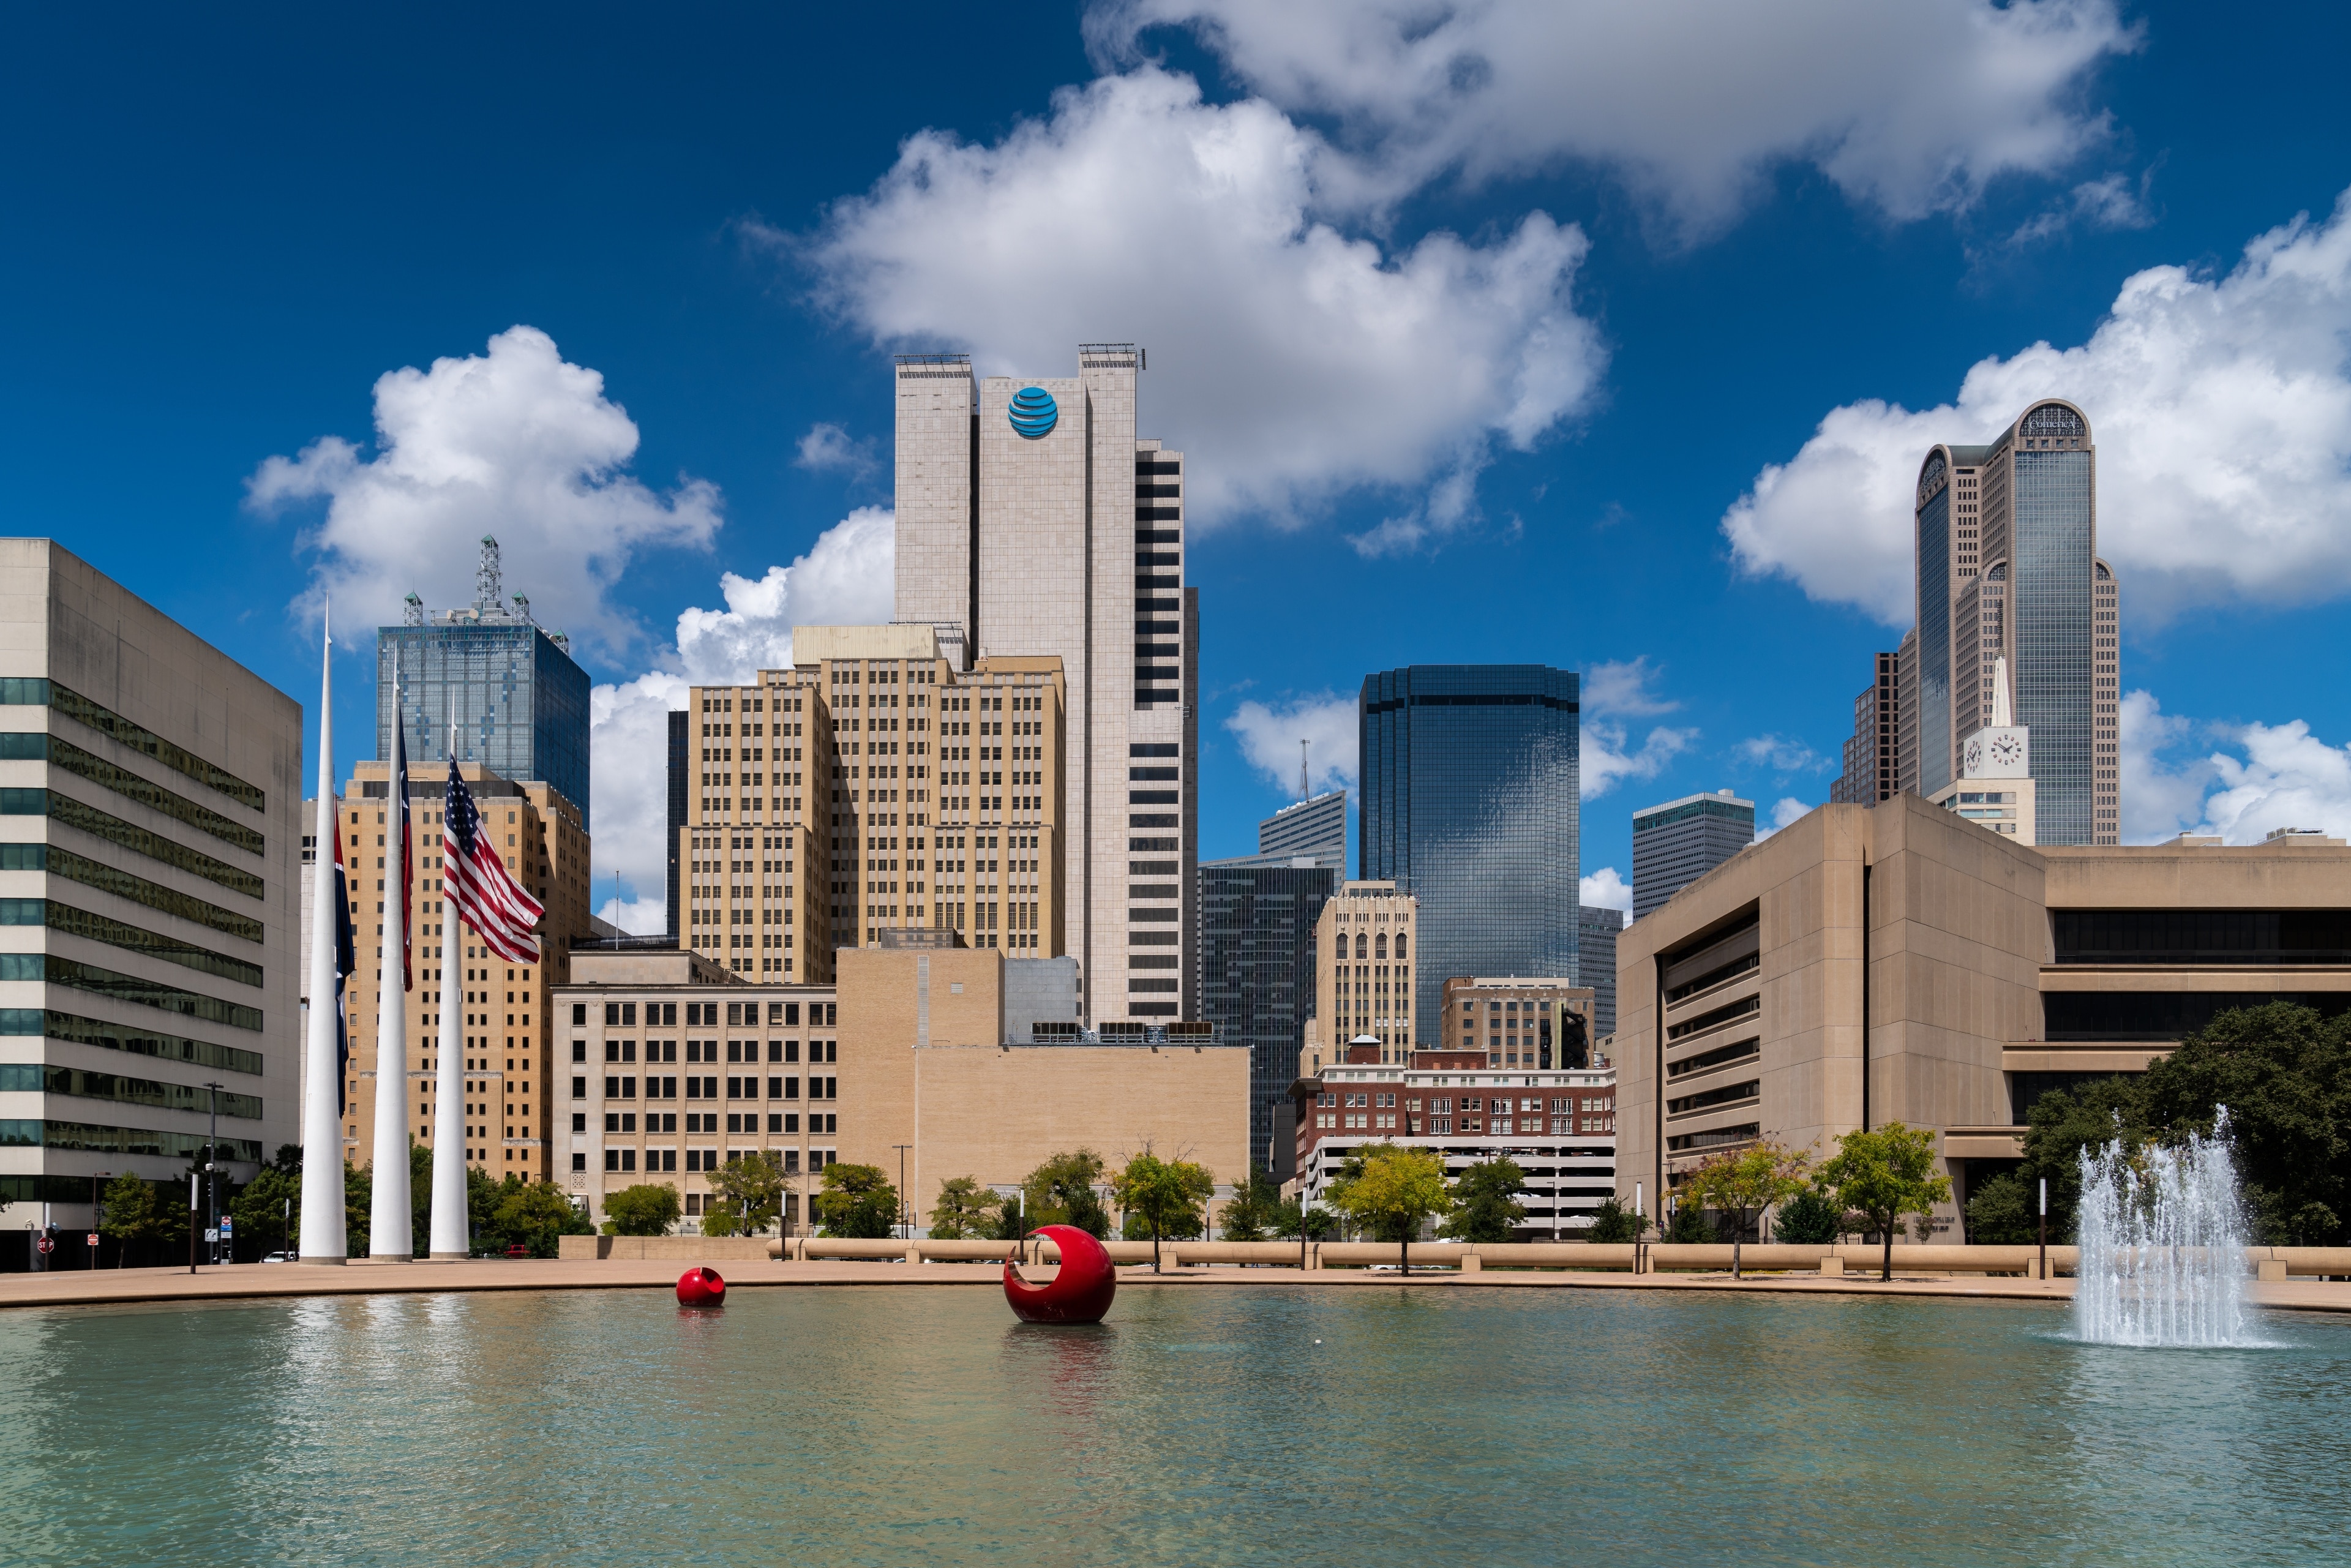 Downtown Dallas Vacation Rentals: house rentals & more | Vrbo